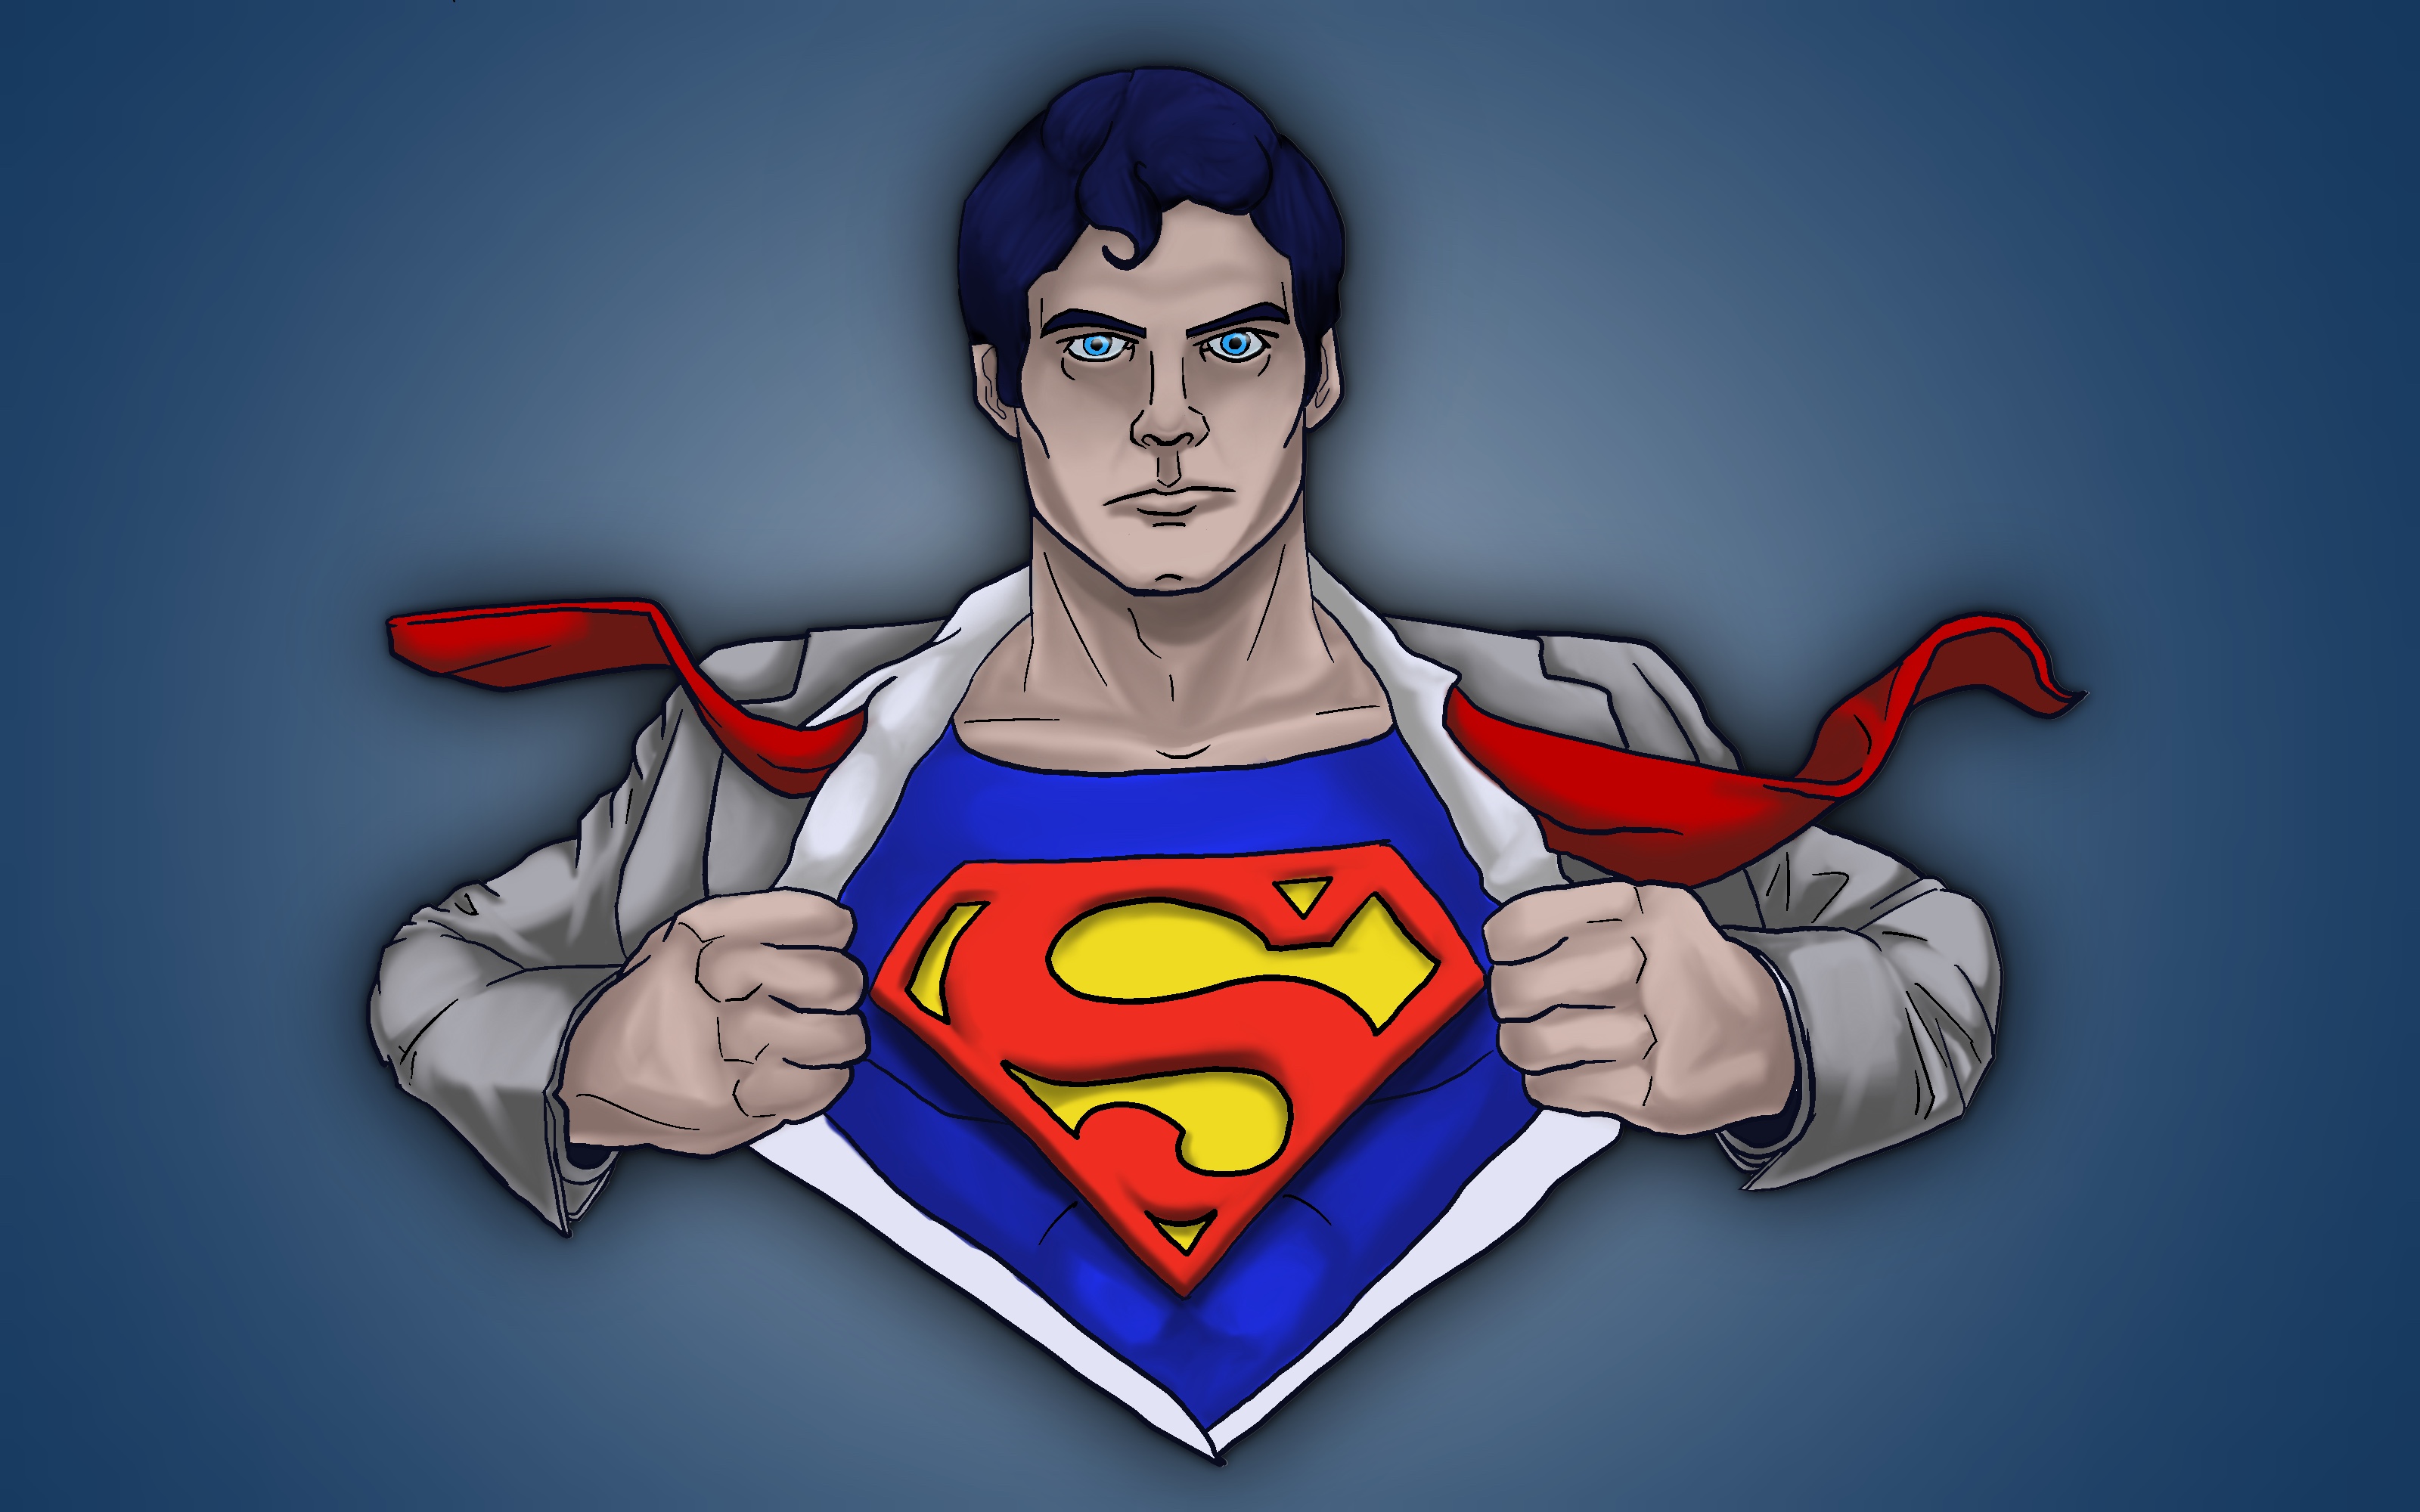 A rendering of the original Chris Reeves portrayal of Clark Kent transforming into Superman. This is the first piece I've managed to realistically portray drapery and fabric. I'm really happy with how it turned out, though the hair could use some work.